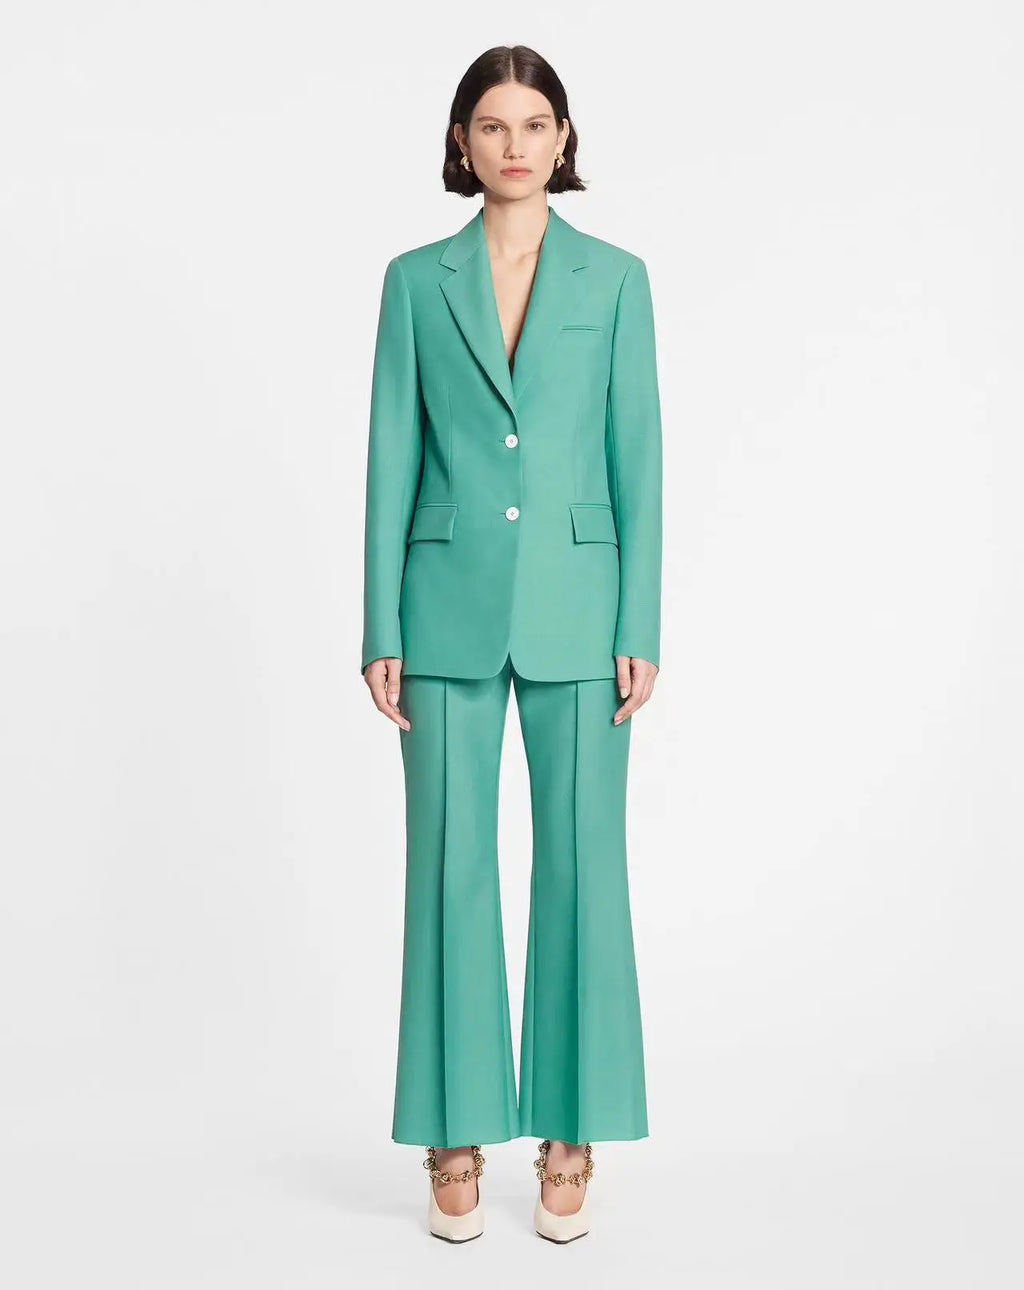 Make waves at the office with Ensemble Alanna! This two-piece suit is perfect for ambitious businesswomen – the sleek jacket and commute-friendly pants are the perfect combination of professional and temperament-capable! Get ready to take your career to the next level!